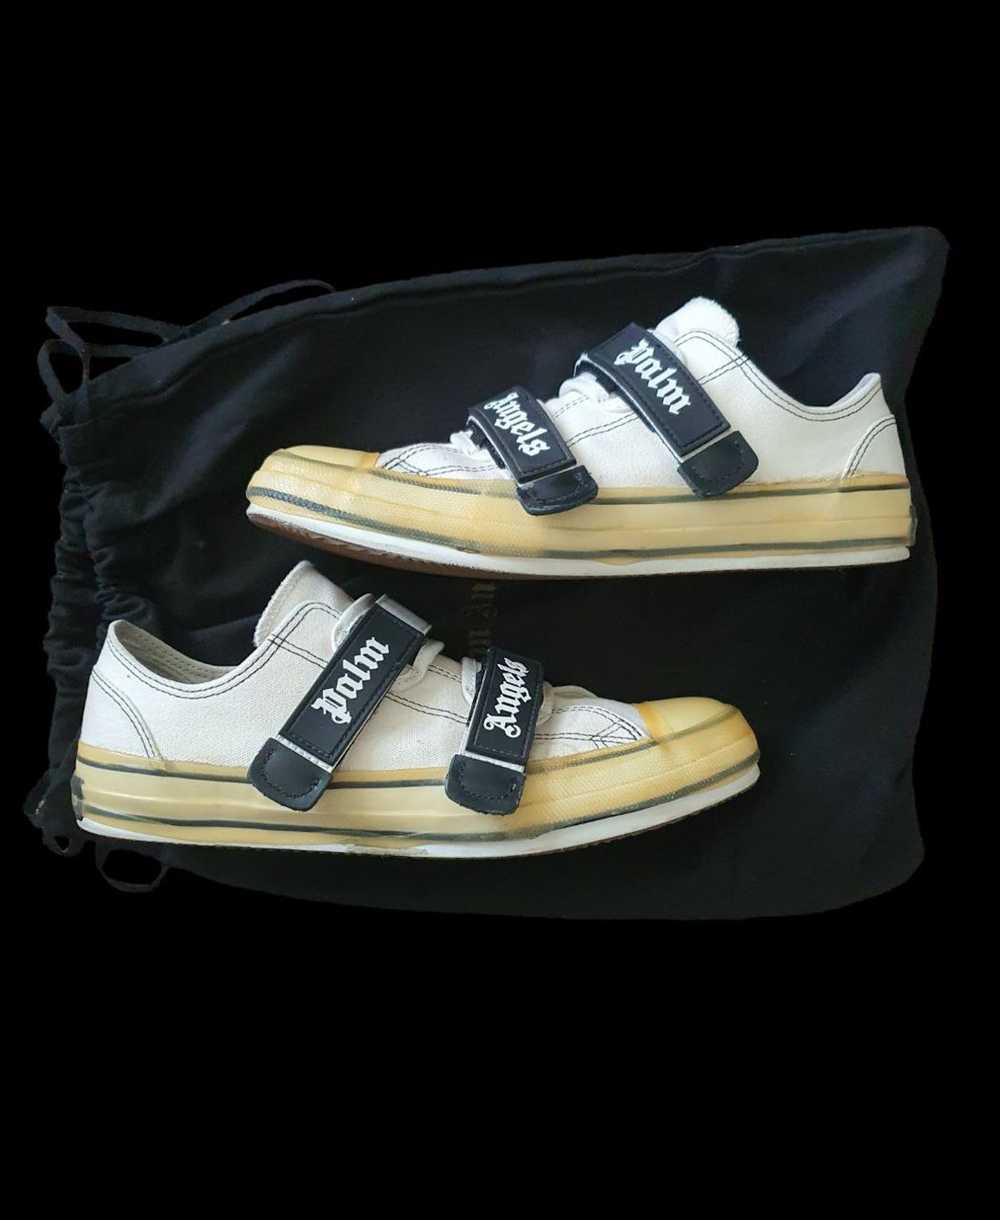 Palm Angels Velcro sneakers - image 2